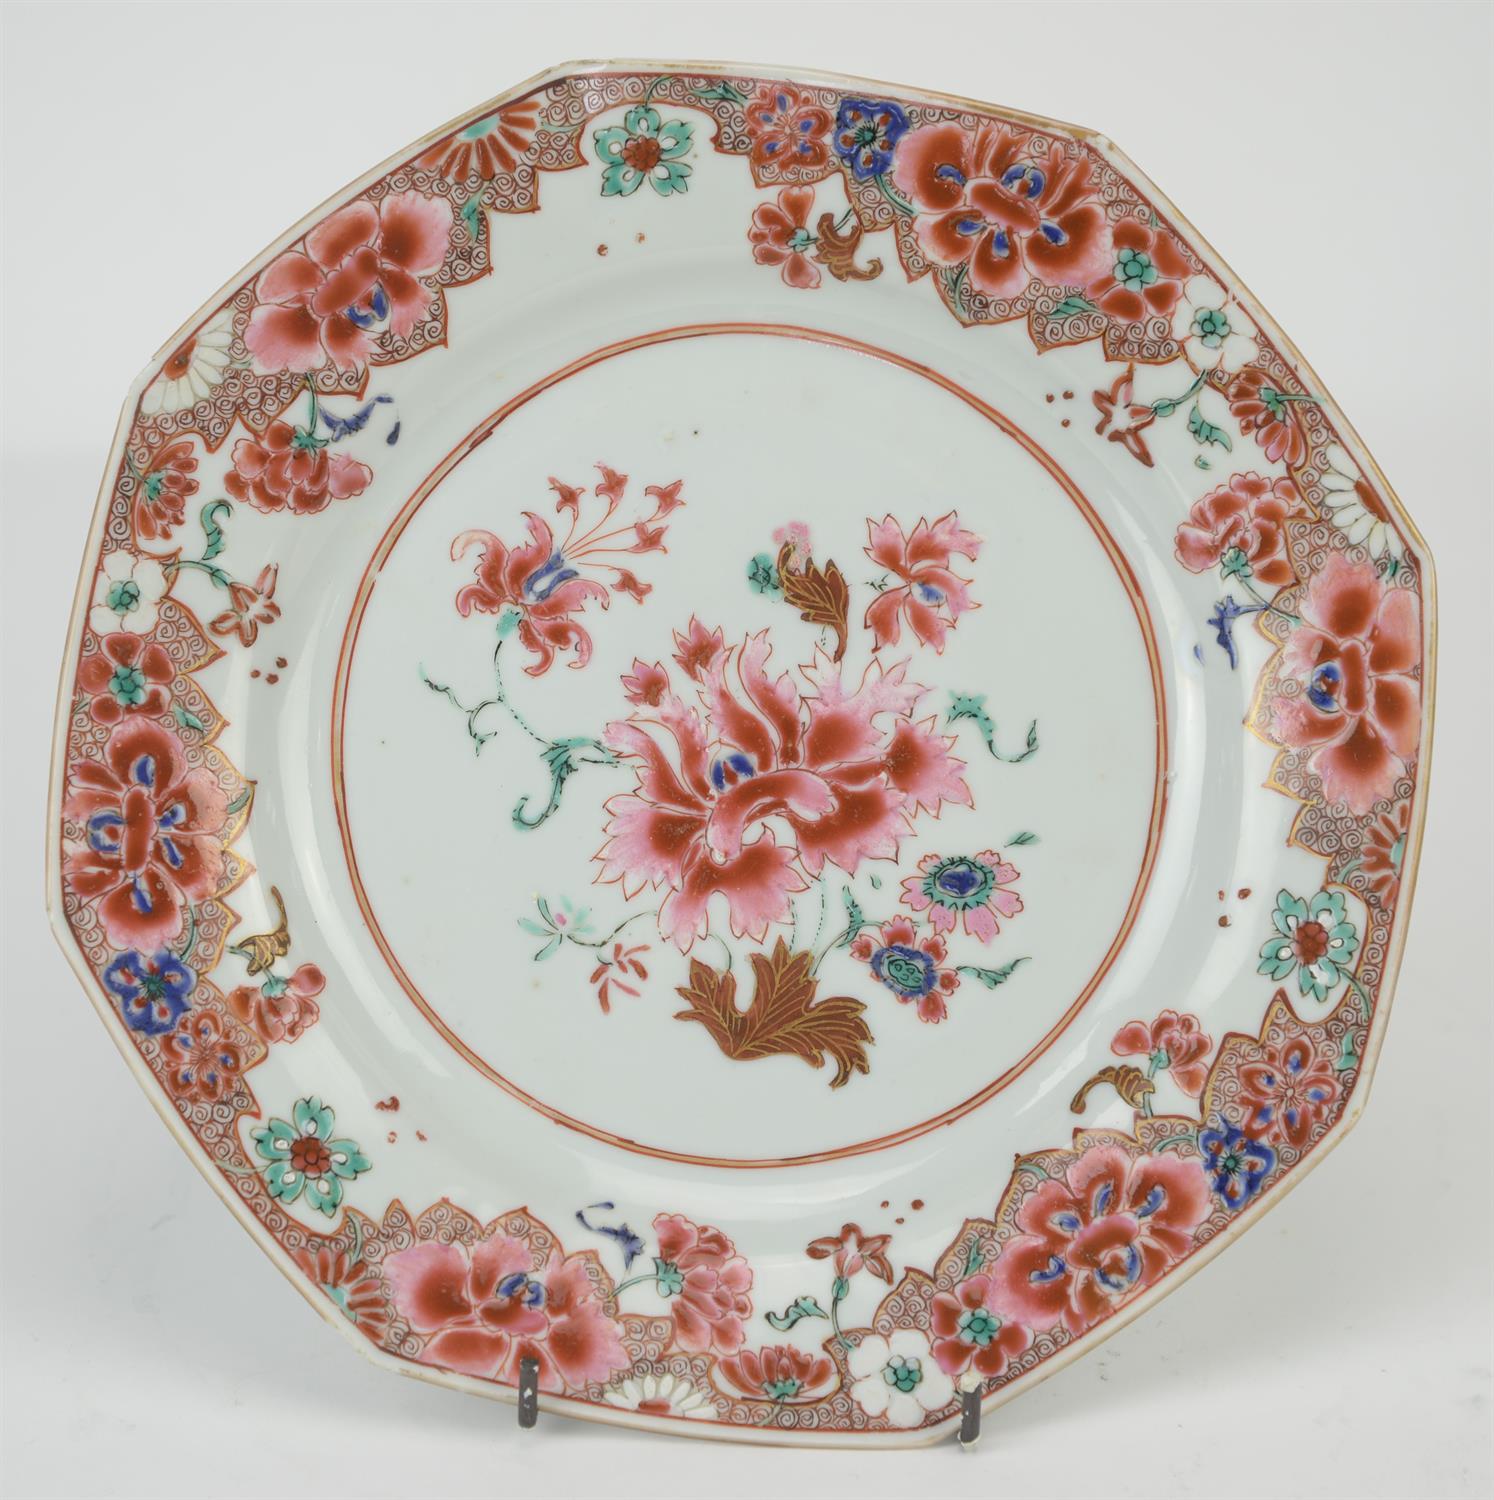 Eight famille rose dishes; each one decorated with floral designs and about 22.5 cm diameter, - Image 28 of 28